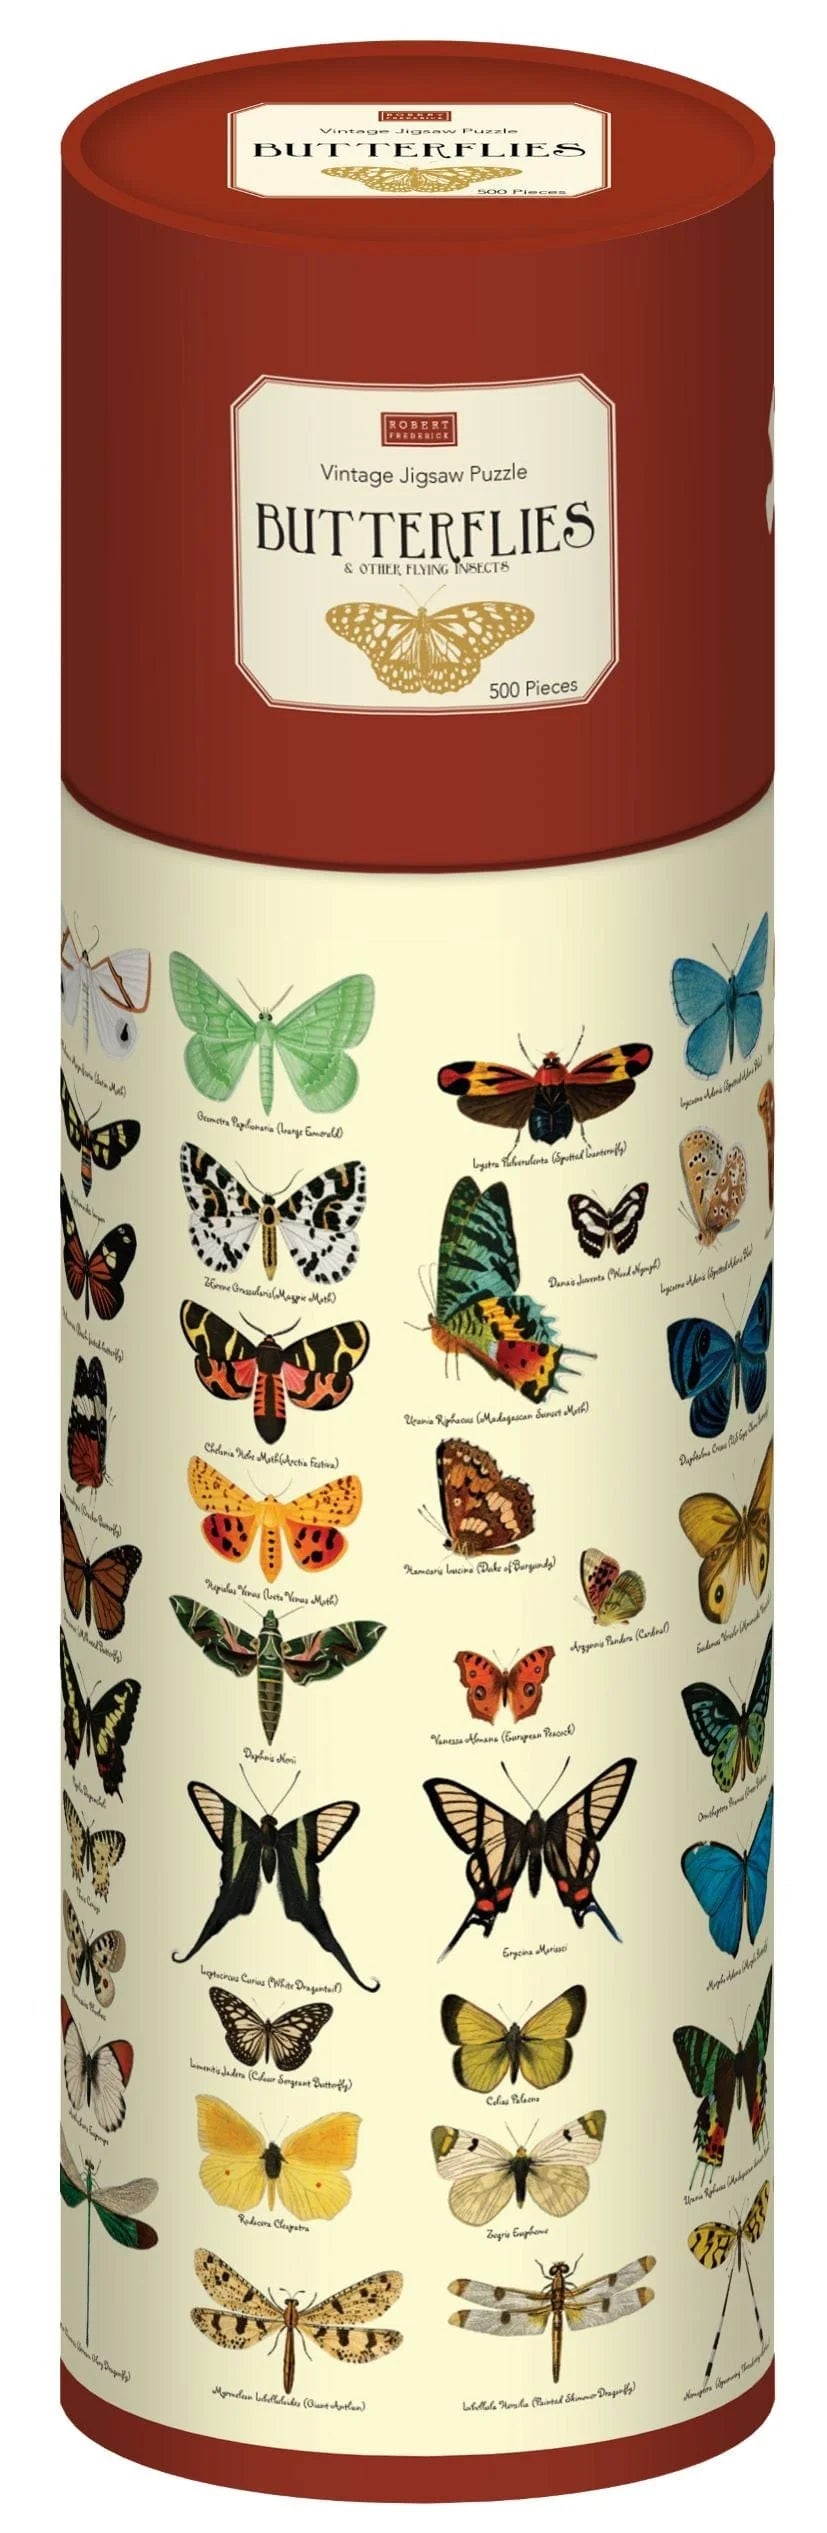 Butterflies 500pc Jigsaw Puzzle Tube